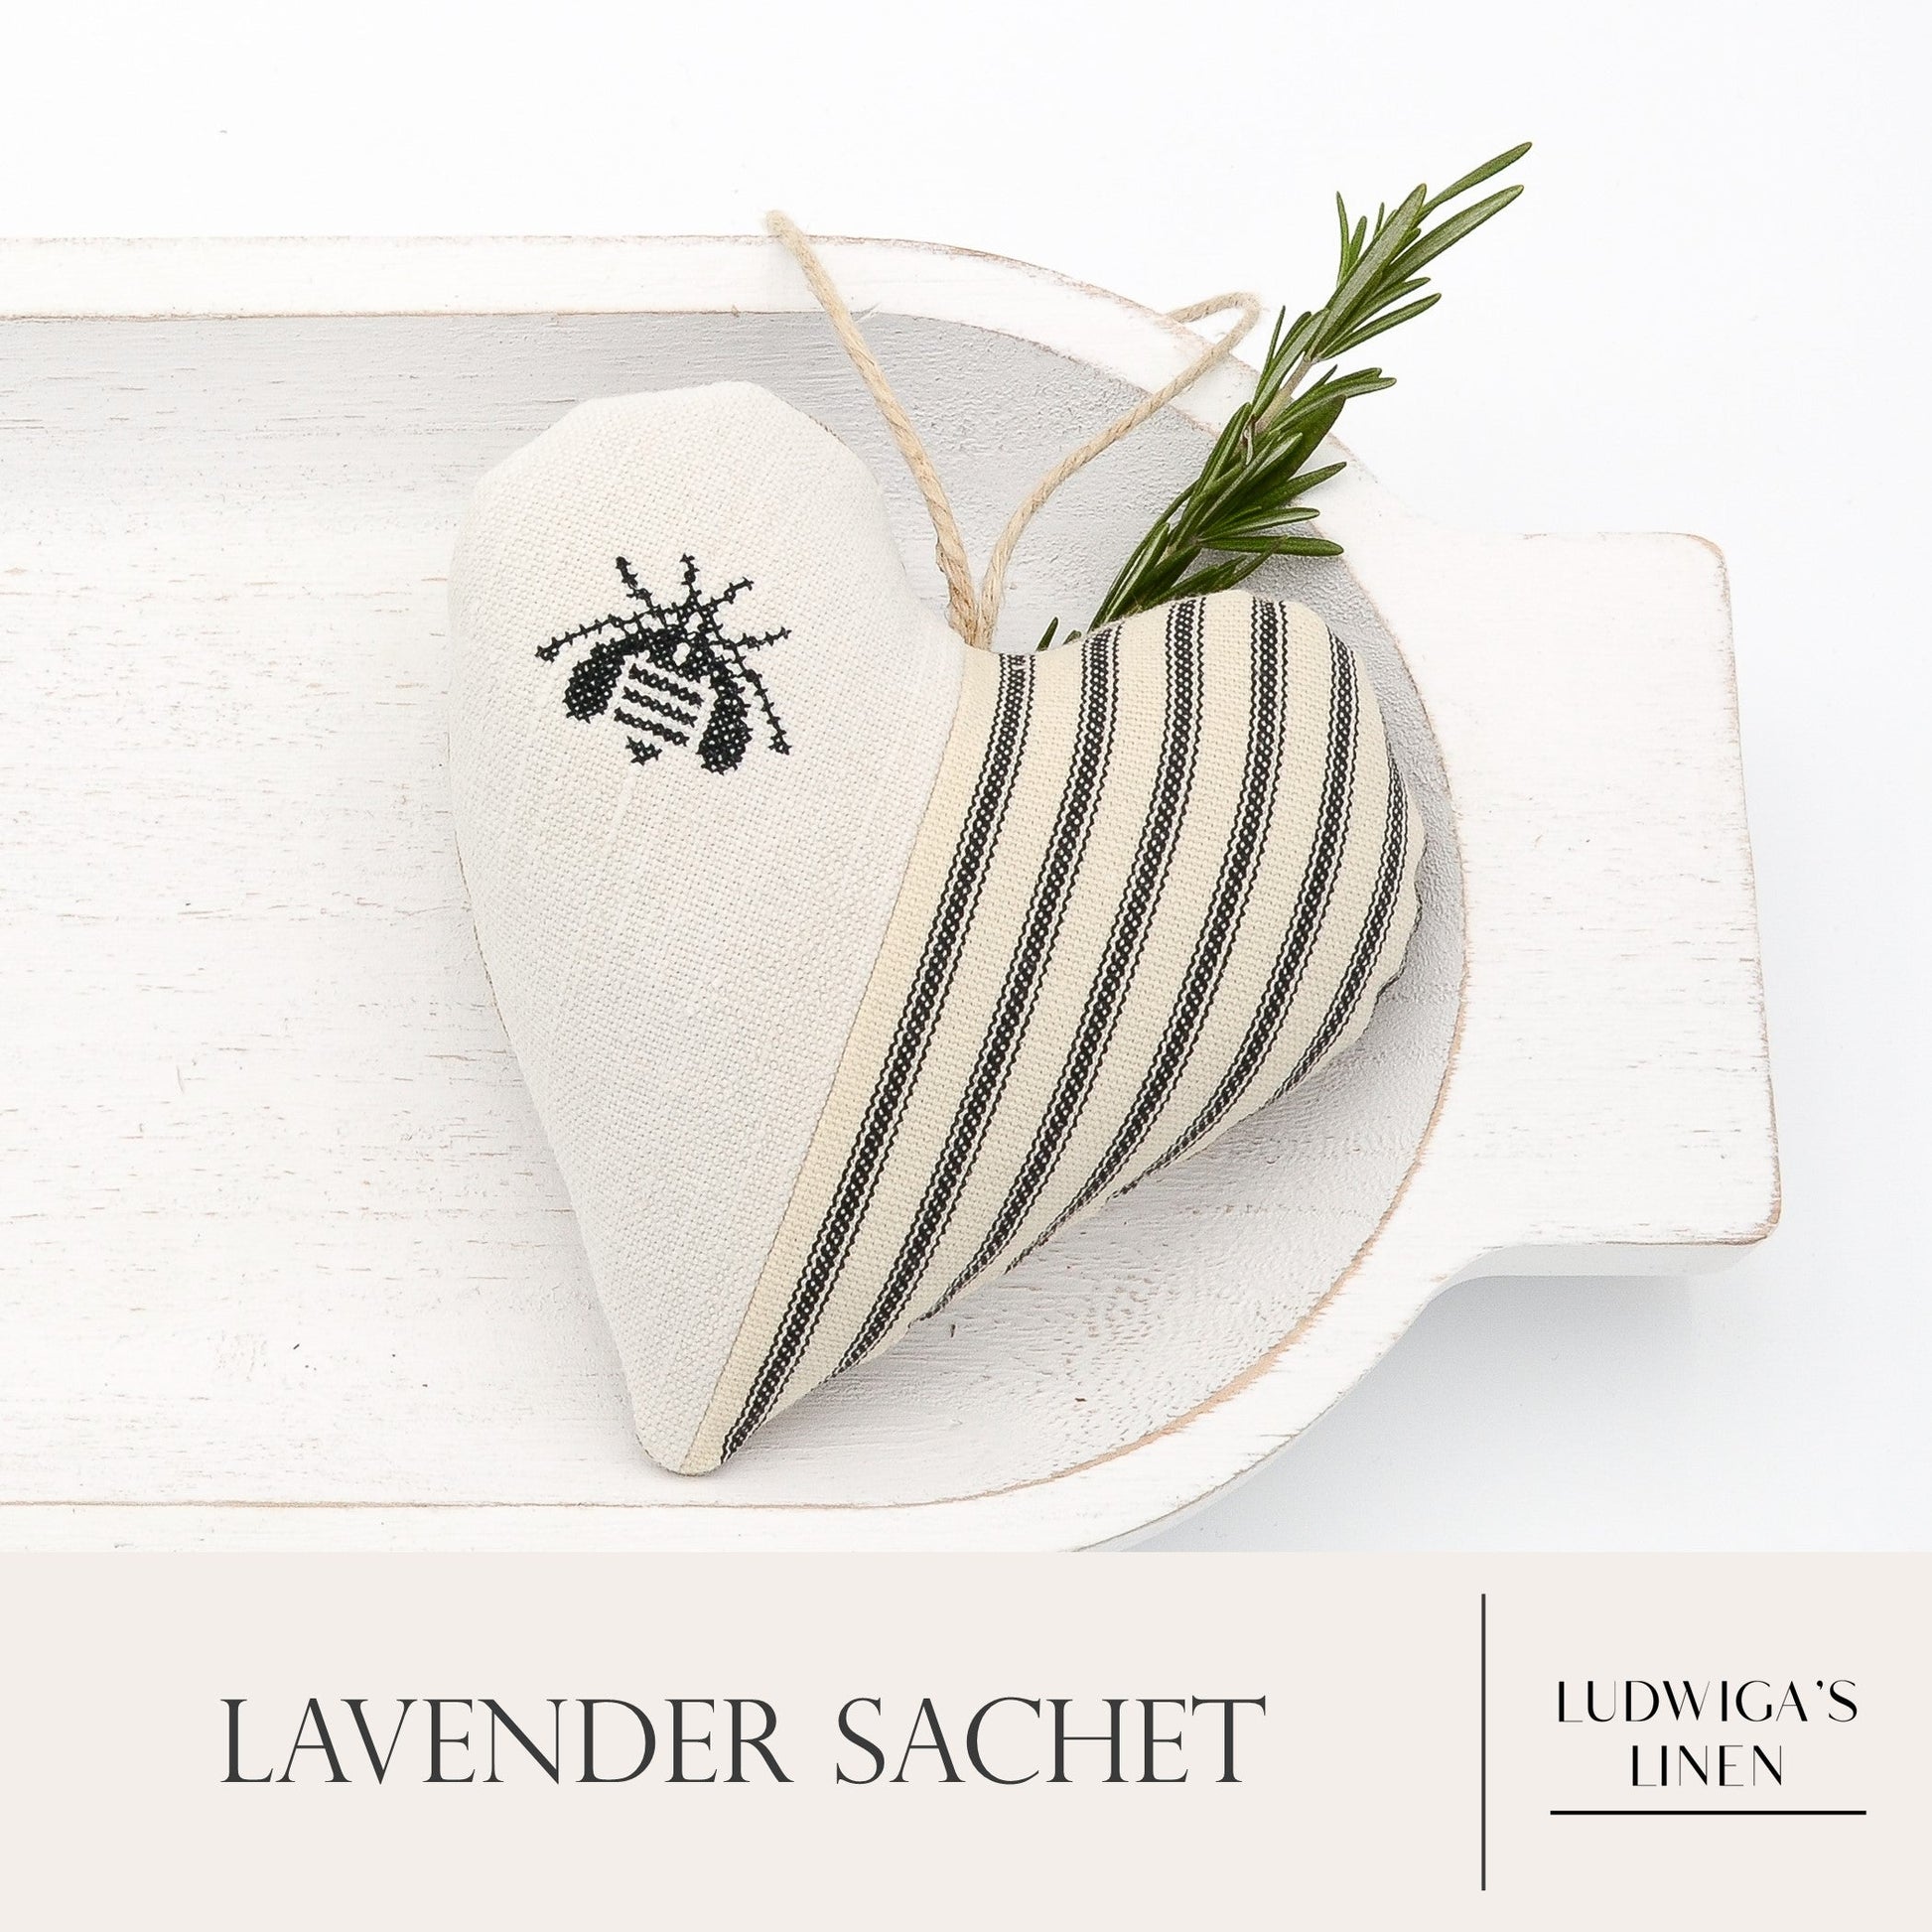 Antique/vintage French/German linen and black-striped cotton ticking lavender sachet heart, hemp twine tie and filled with high quality lavender from Provence France